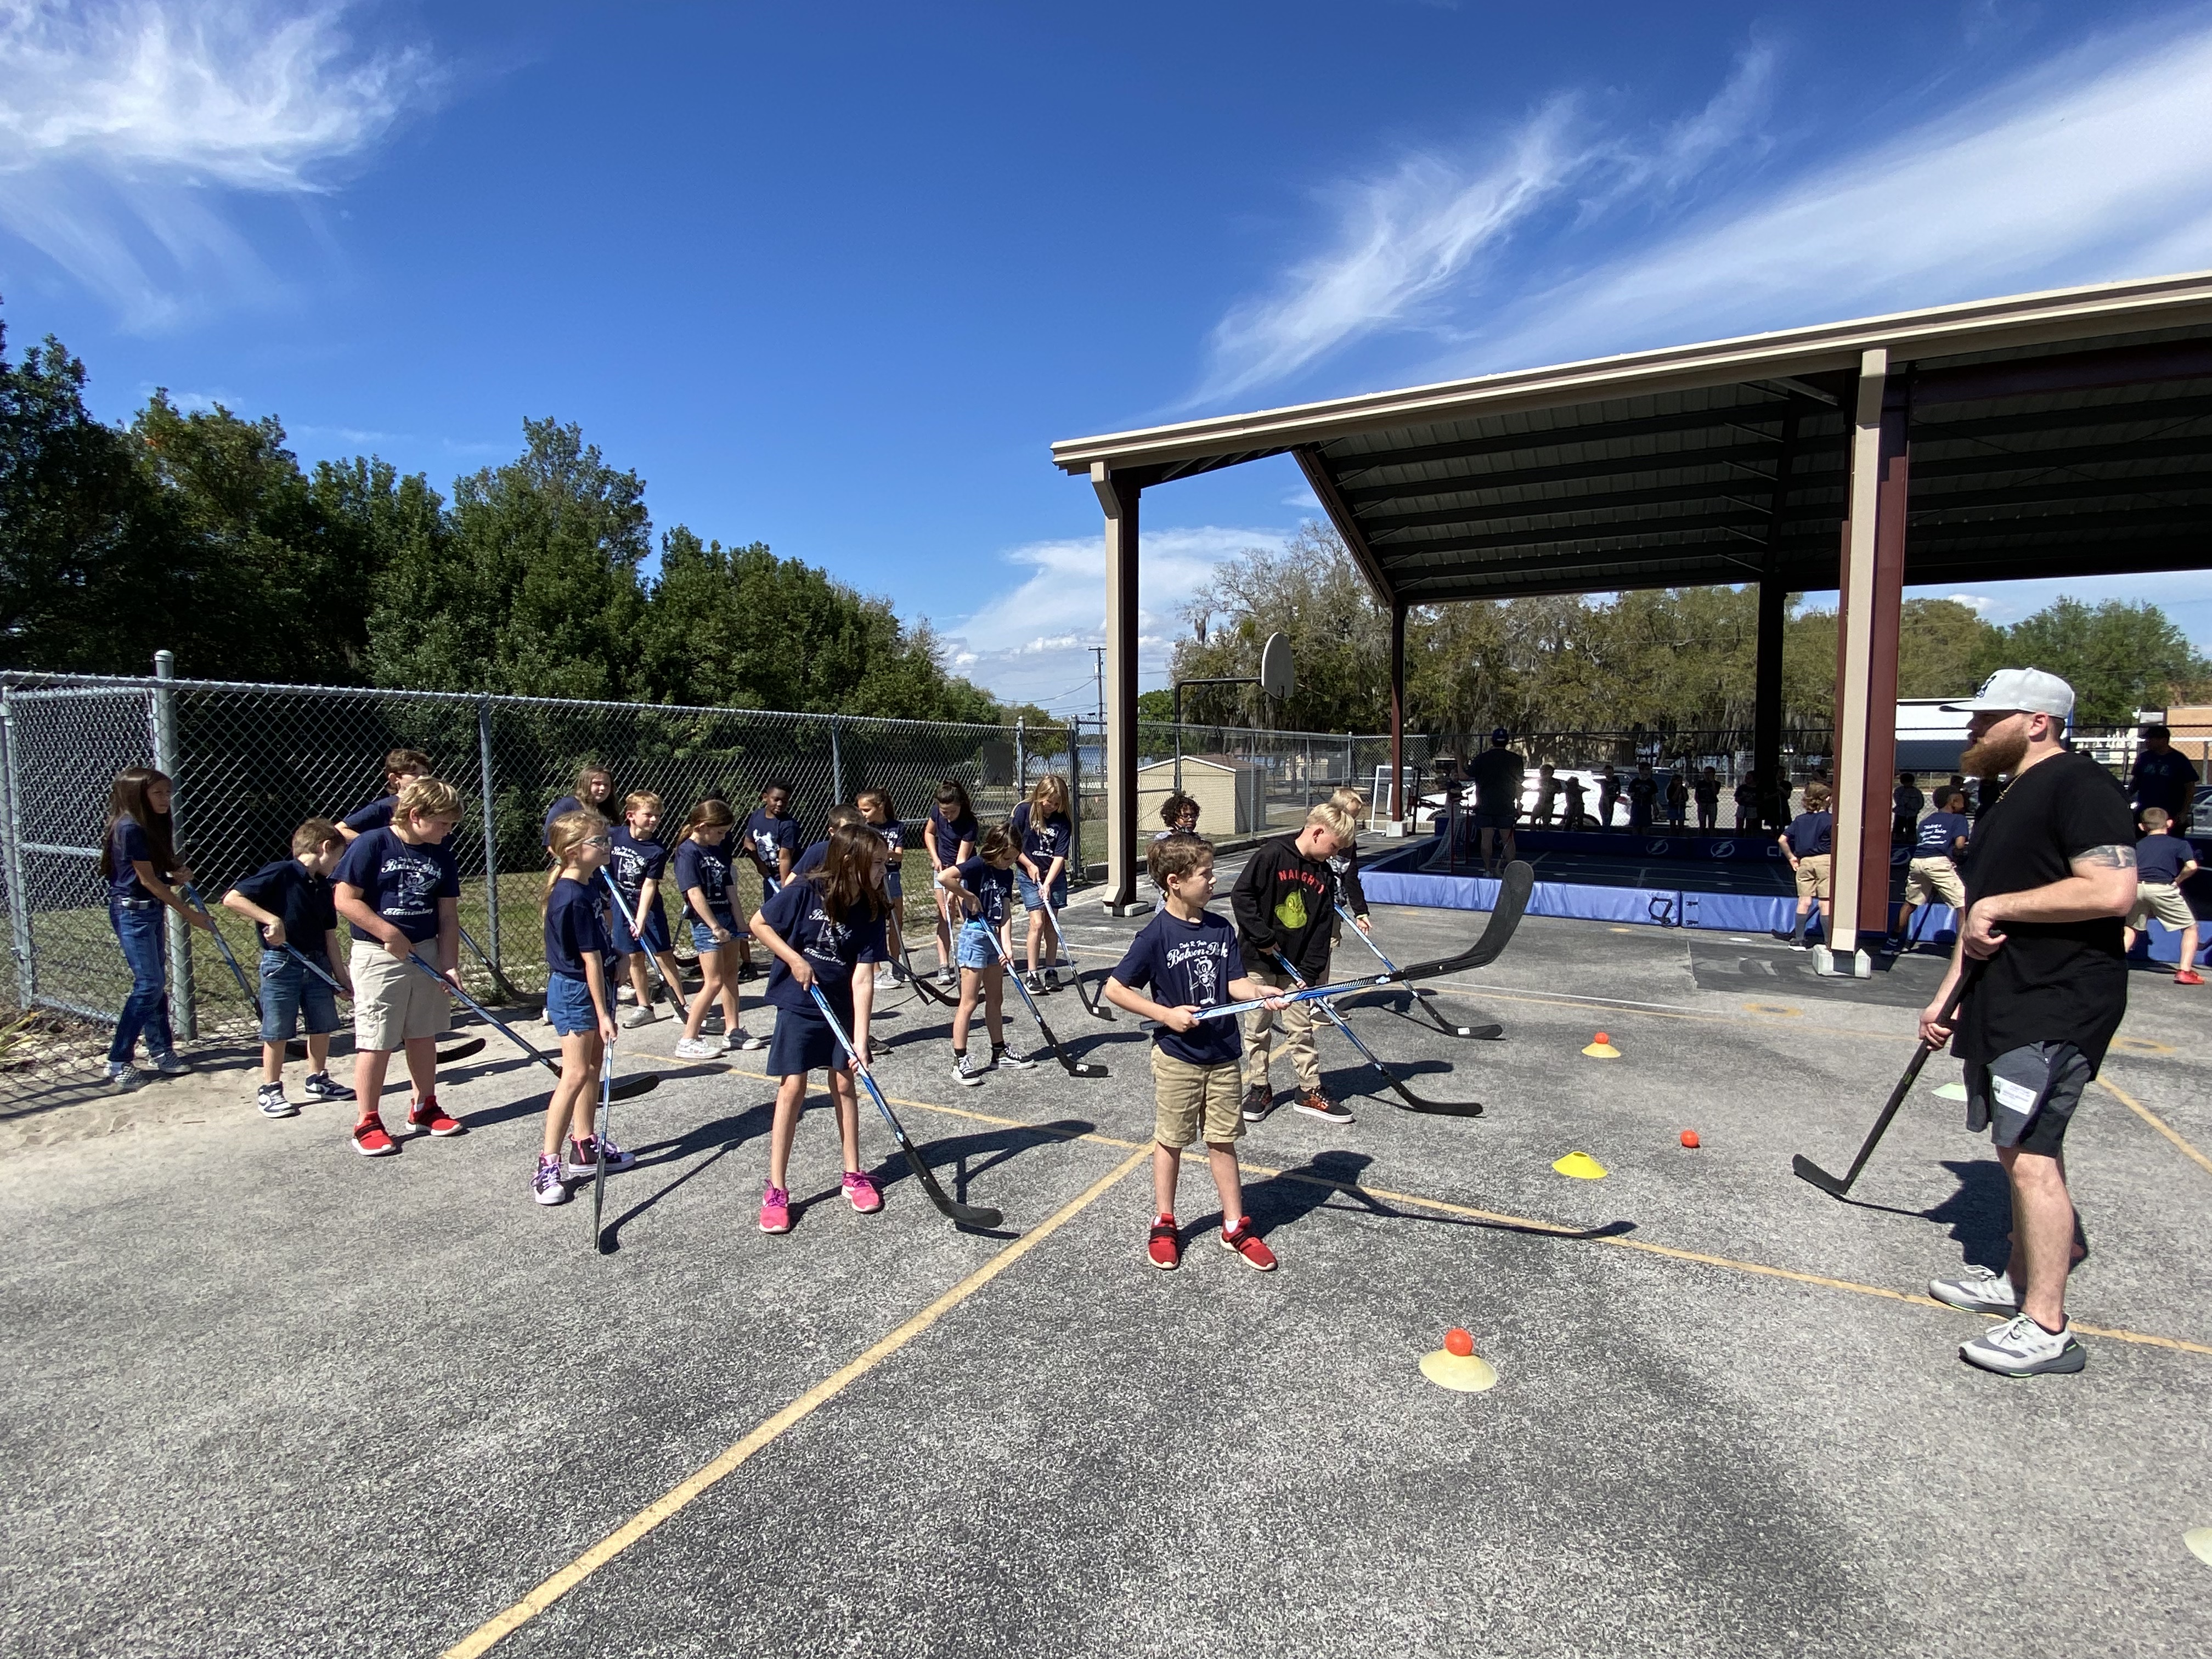 3rd grade students learning hockey techniques.